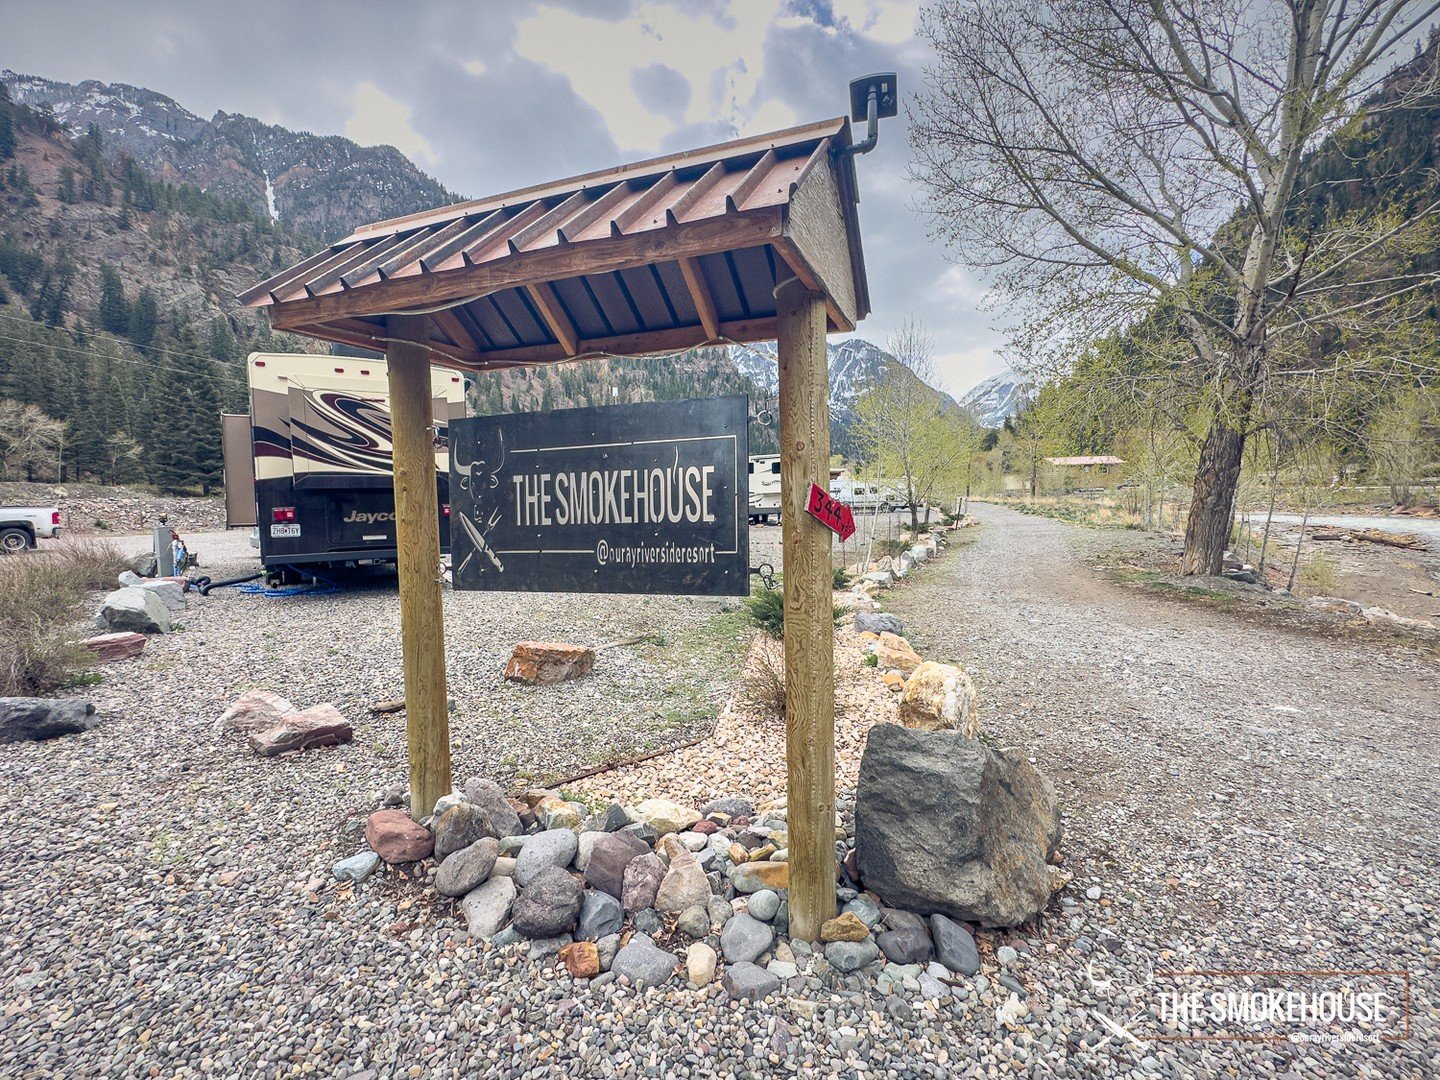 We have 2 new signs at each end of our resort, right on the Riverwalk. 

#ouray #ouraycolorado #ourayriversideresort #visitcolorado #coloradical